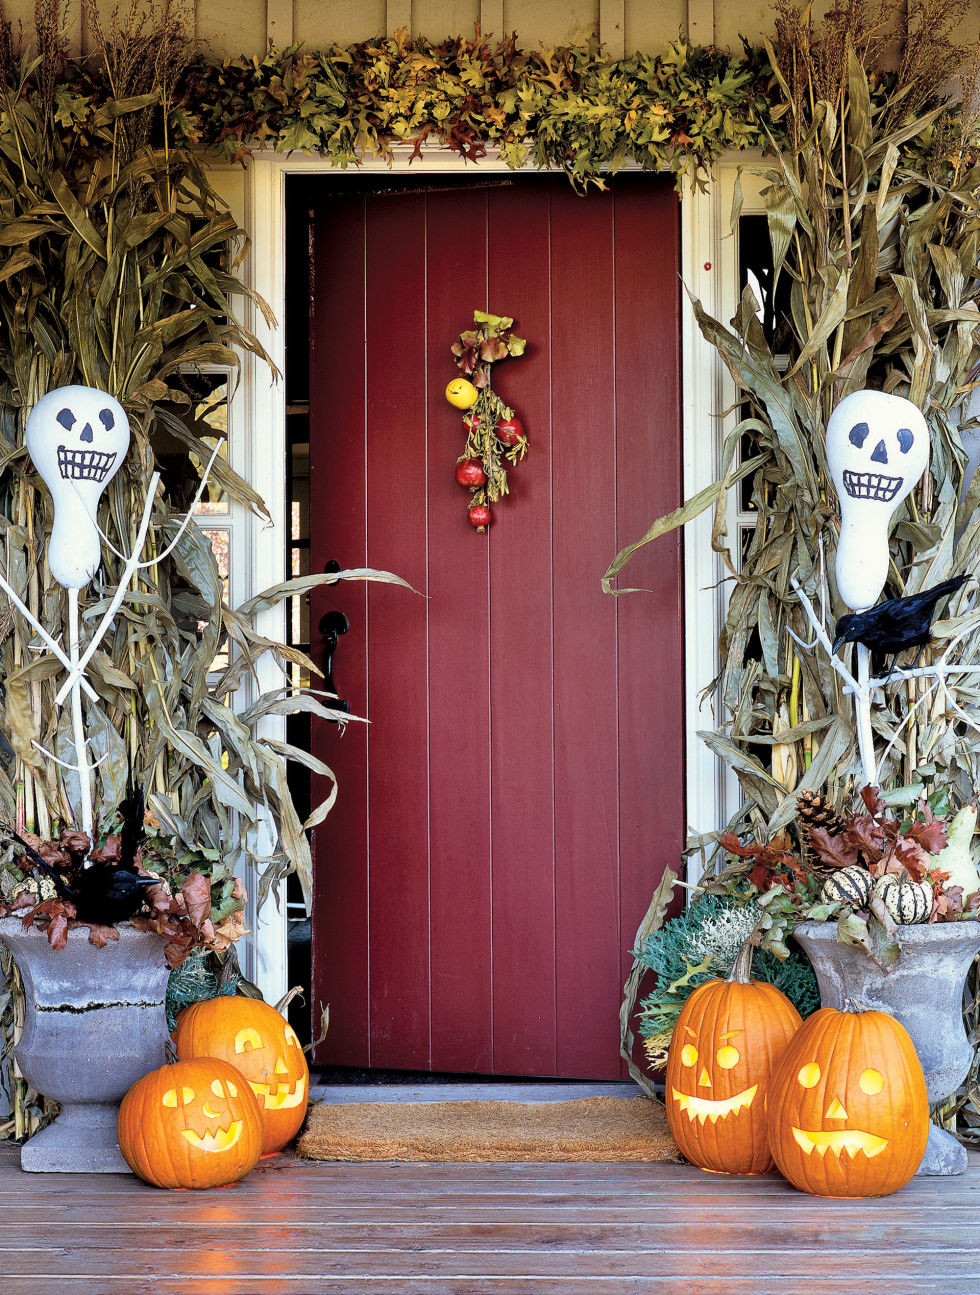 Halloween Porch Decorating Ideas
 11 Awesome Outdoor Halloween Decoration Ideas Awesome 11